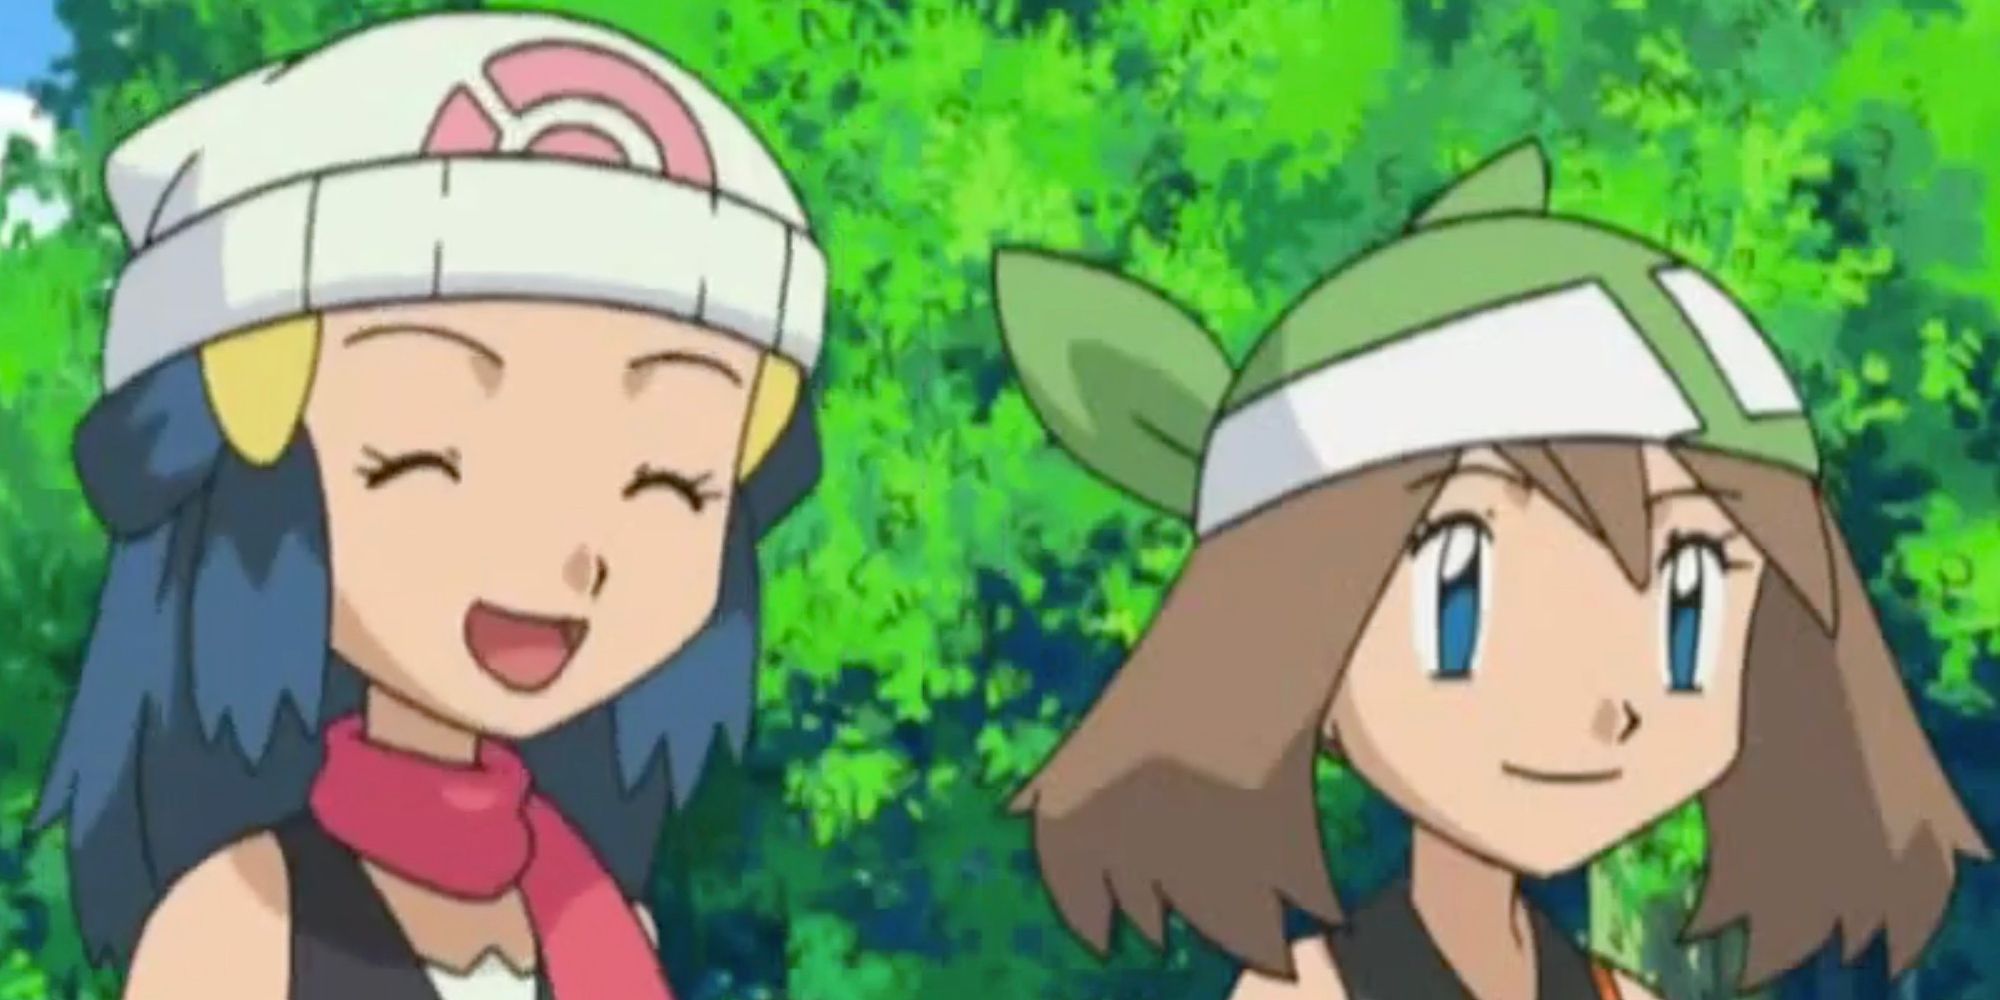 Dawn and May standing together in Pokémon.